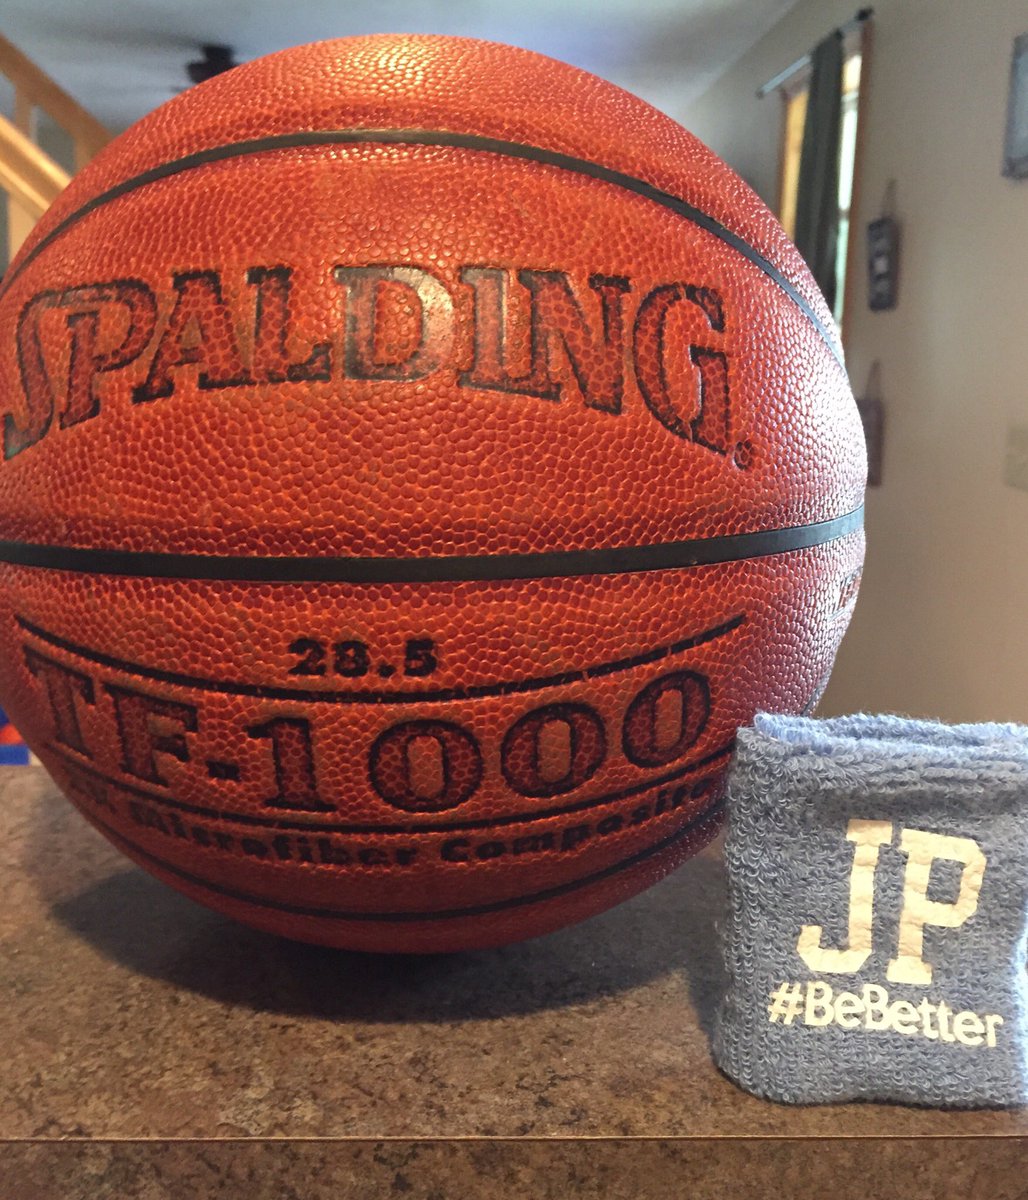 Over the next few days, think about how you could #BeBetter in honor of our loyal friend and supporter, Mr. Paire #BeBetterTogether #PlayforPaire